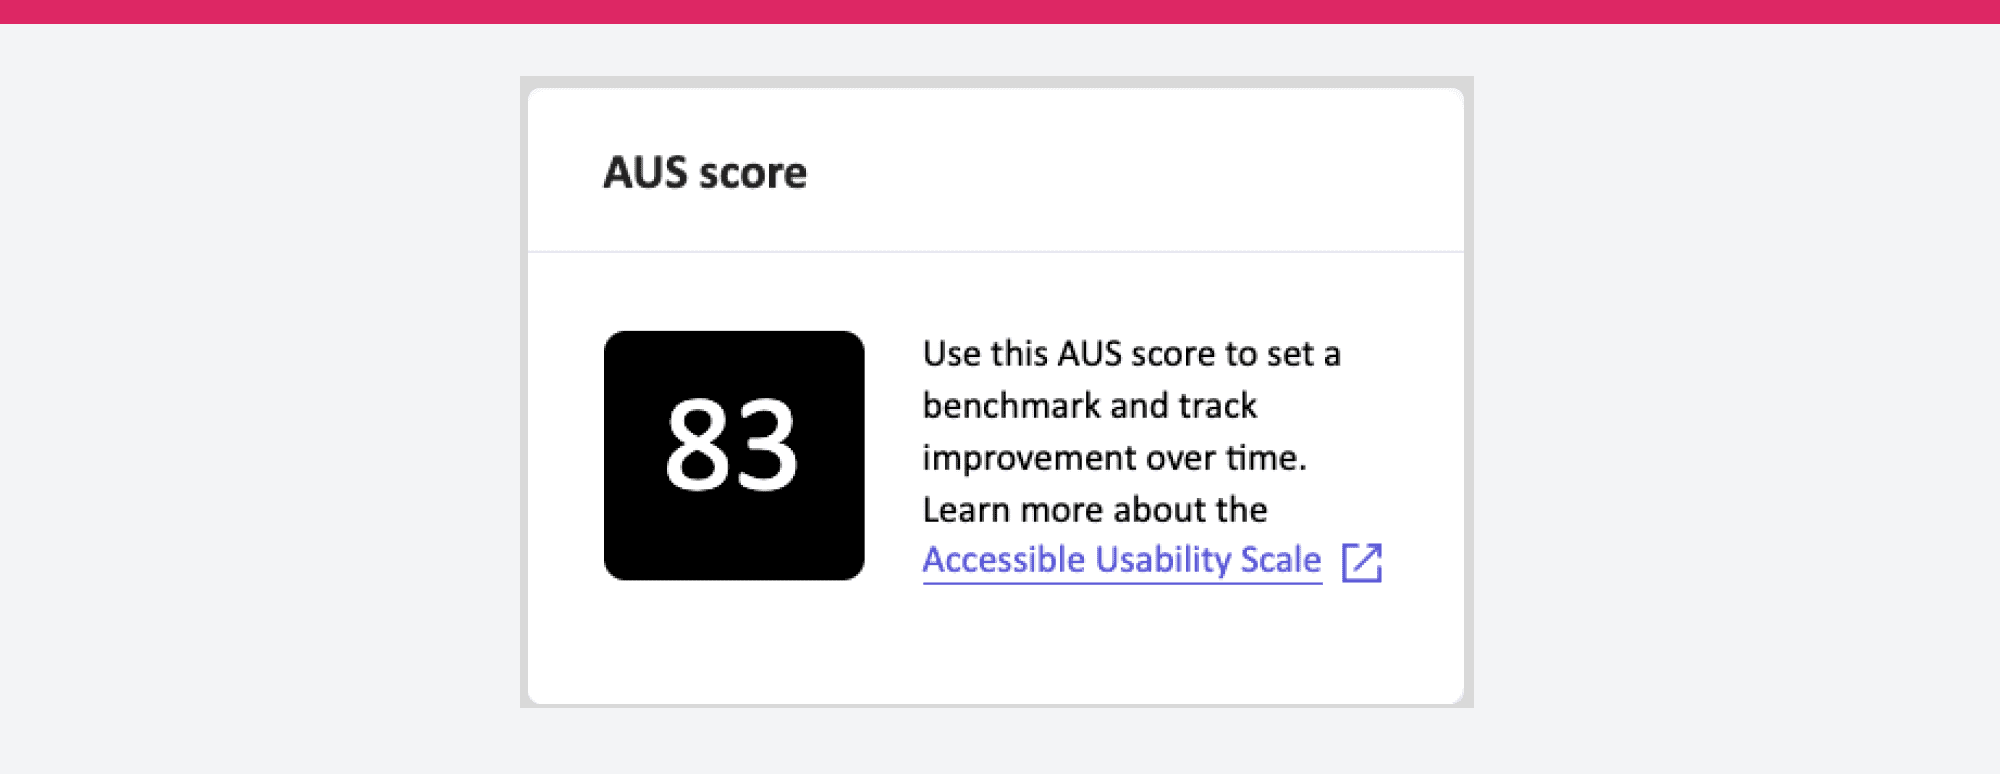 Screenshot of Fable's AUS score. Score: 83. Text: Use this AUS score to set a benchmark and track improvement over time. Learn more about the Accessible Usability Score (hyperlinked).